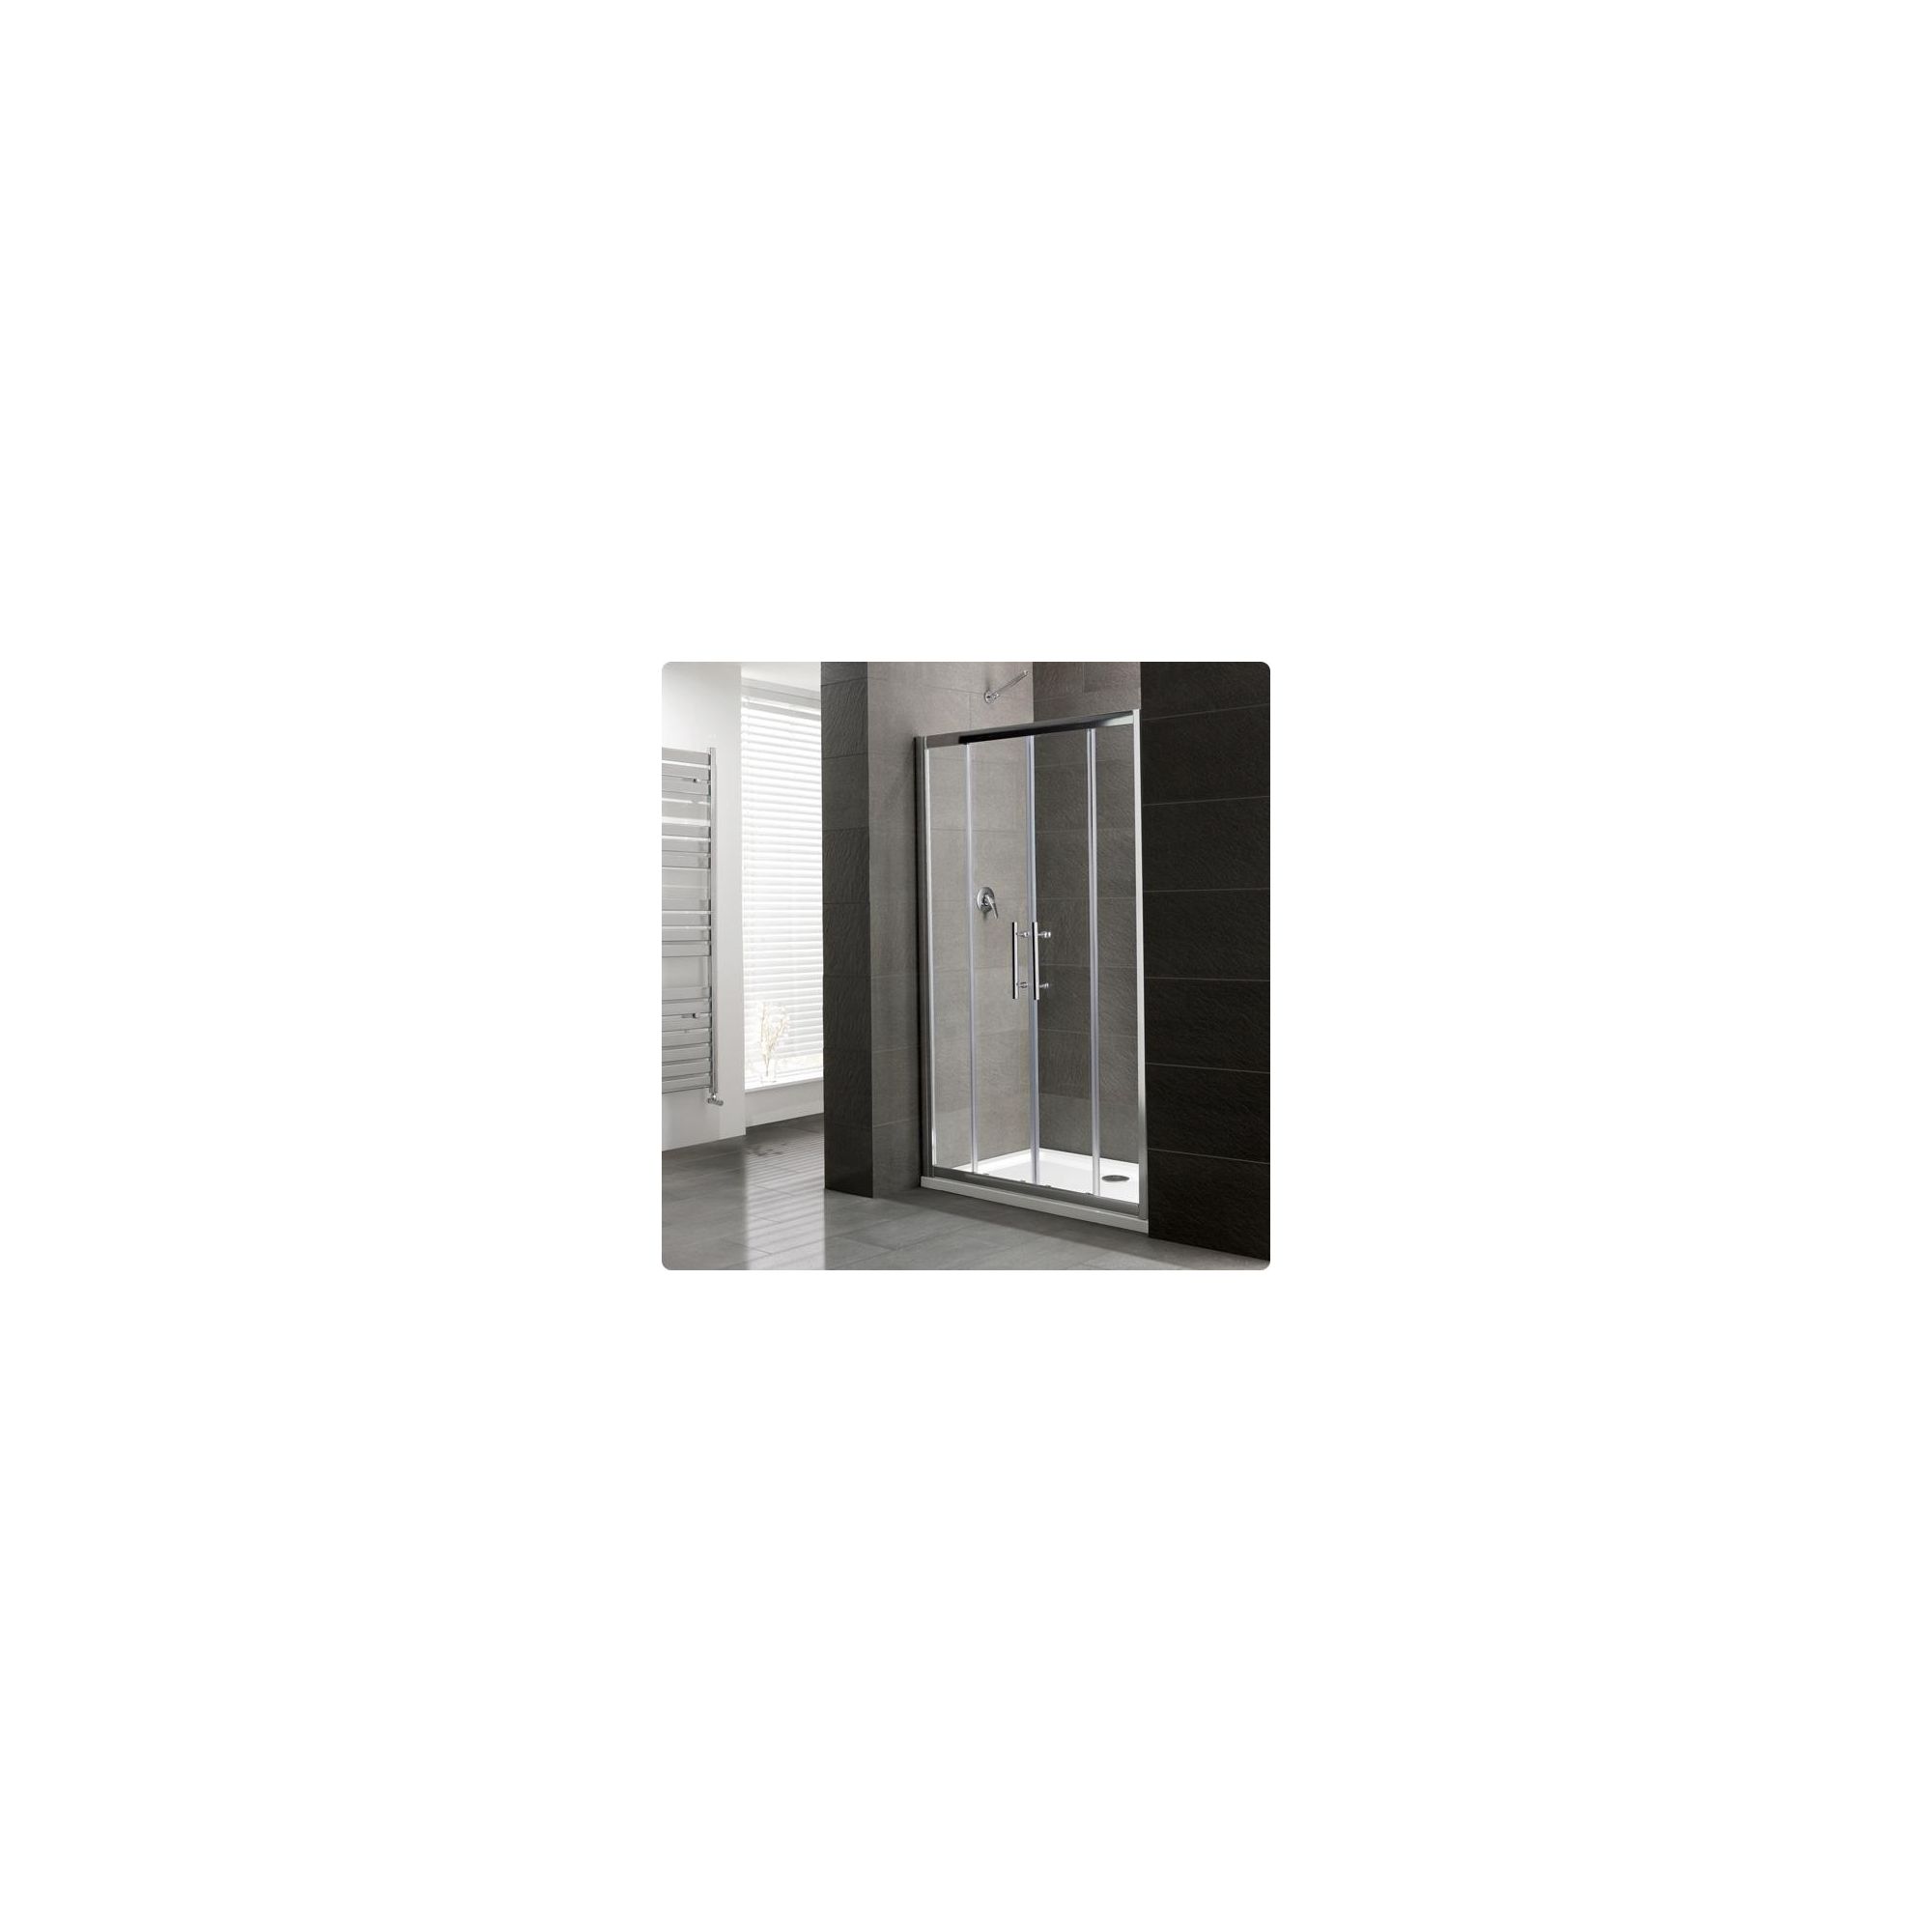 Duchy Select Silver Double Sliding Door Shower Enclosure, 1700mm x 760mm, Standard Tray, 6mm Glass at Tesco Direct